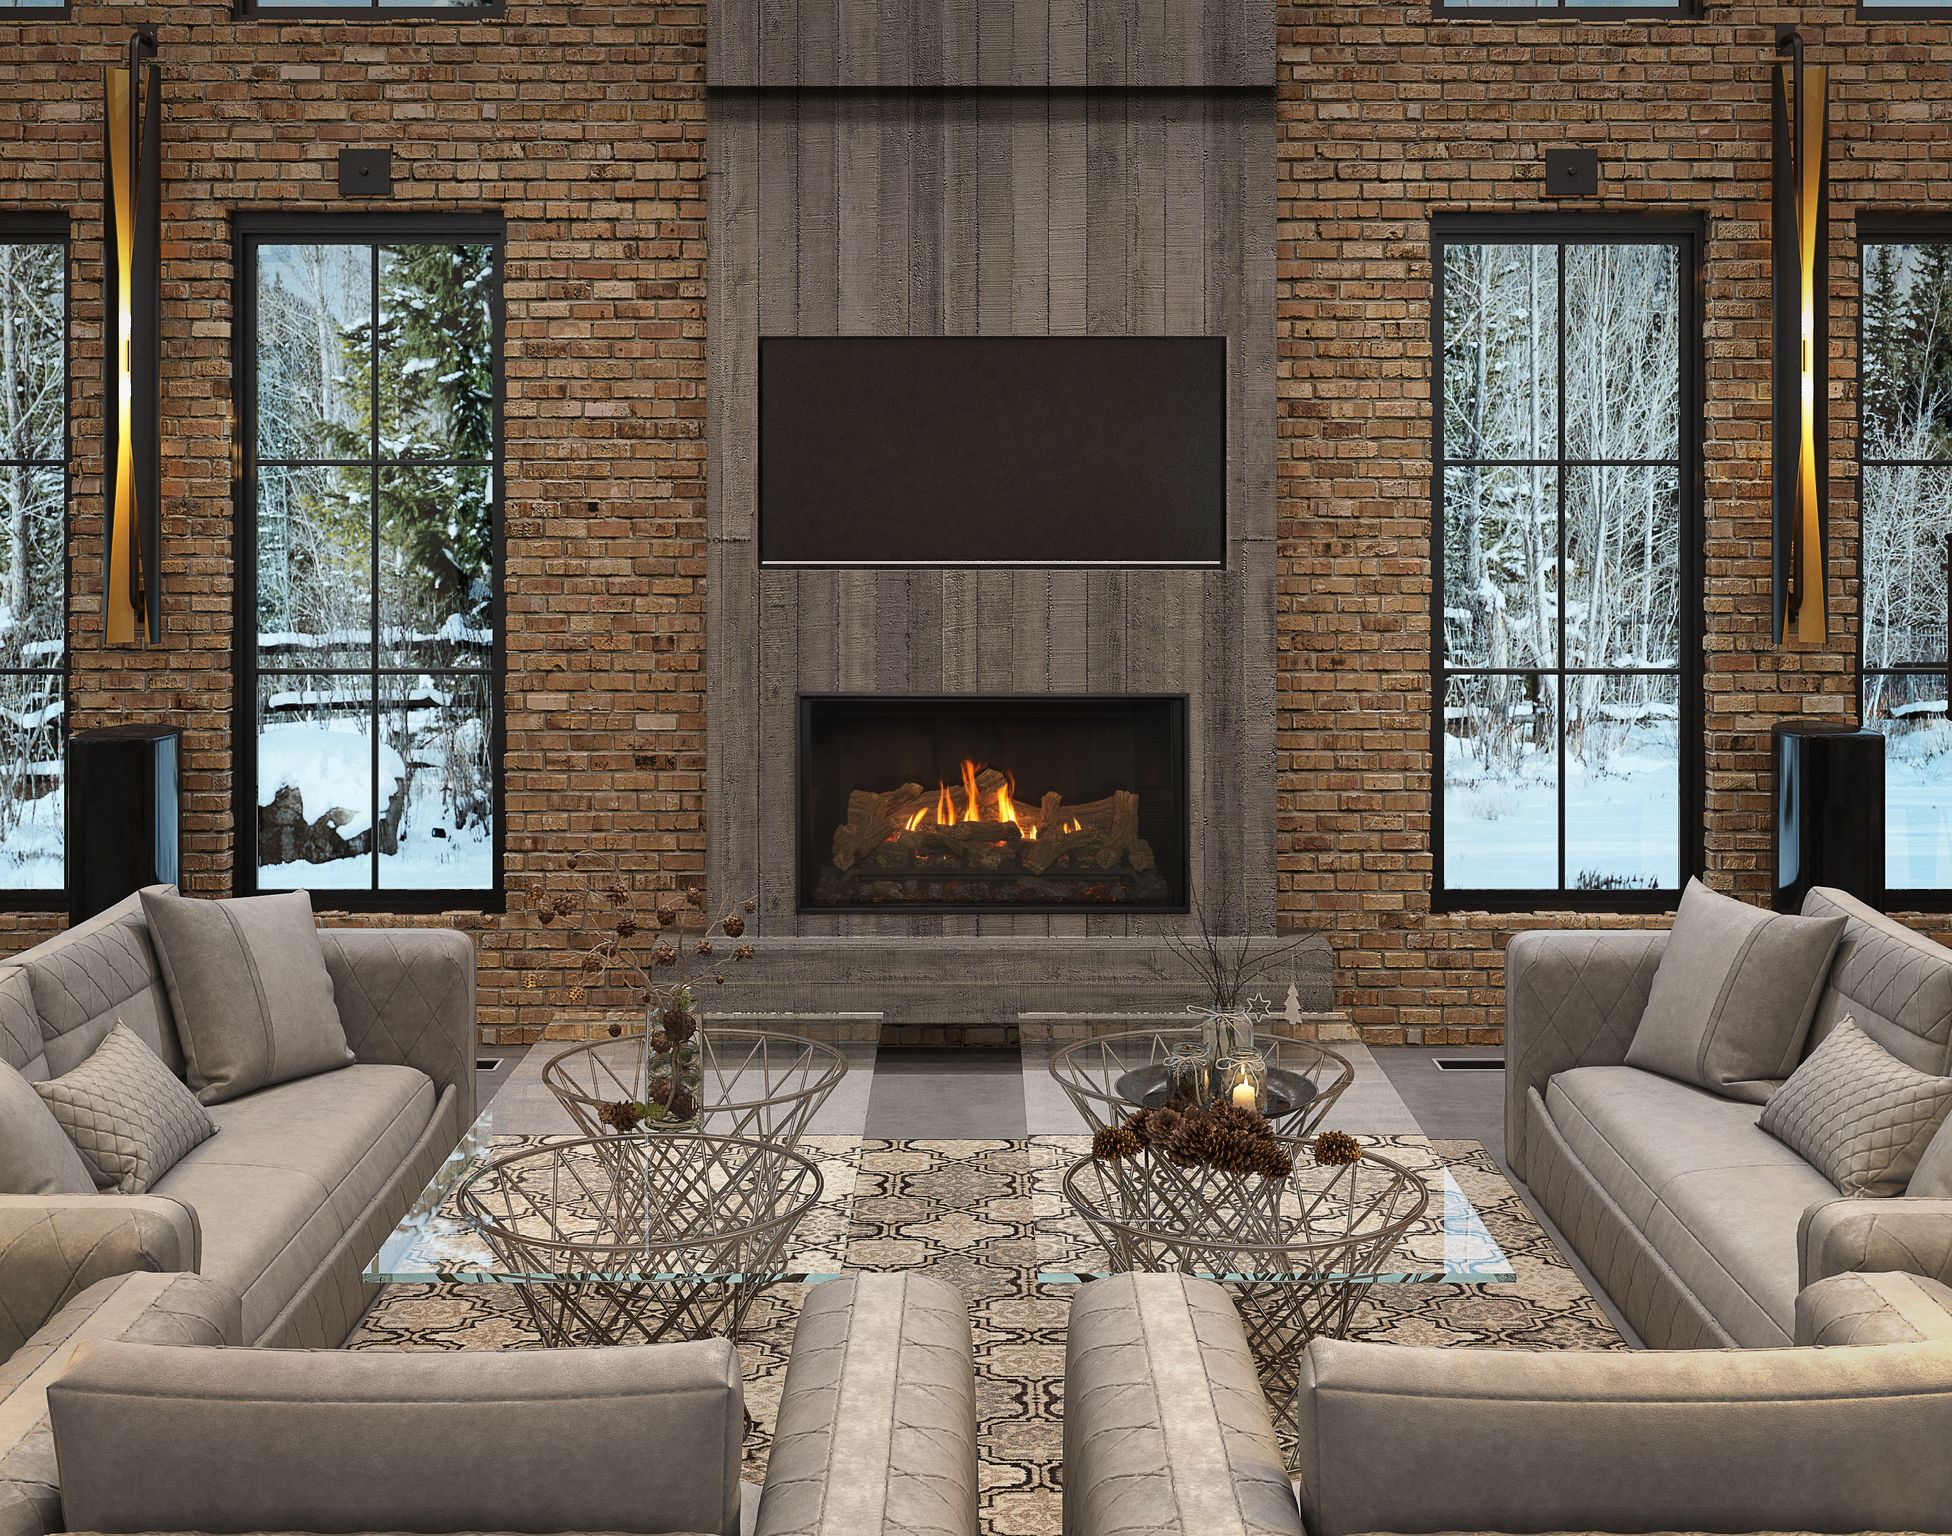 4 Ways Fireplaces Add Ambiance to Your Home (Without the Heat!)